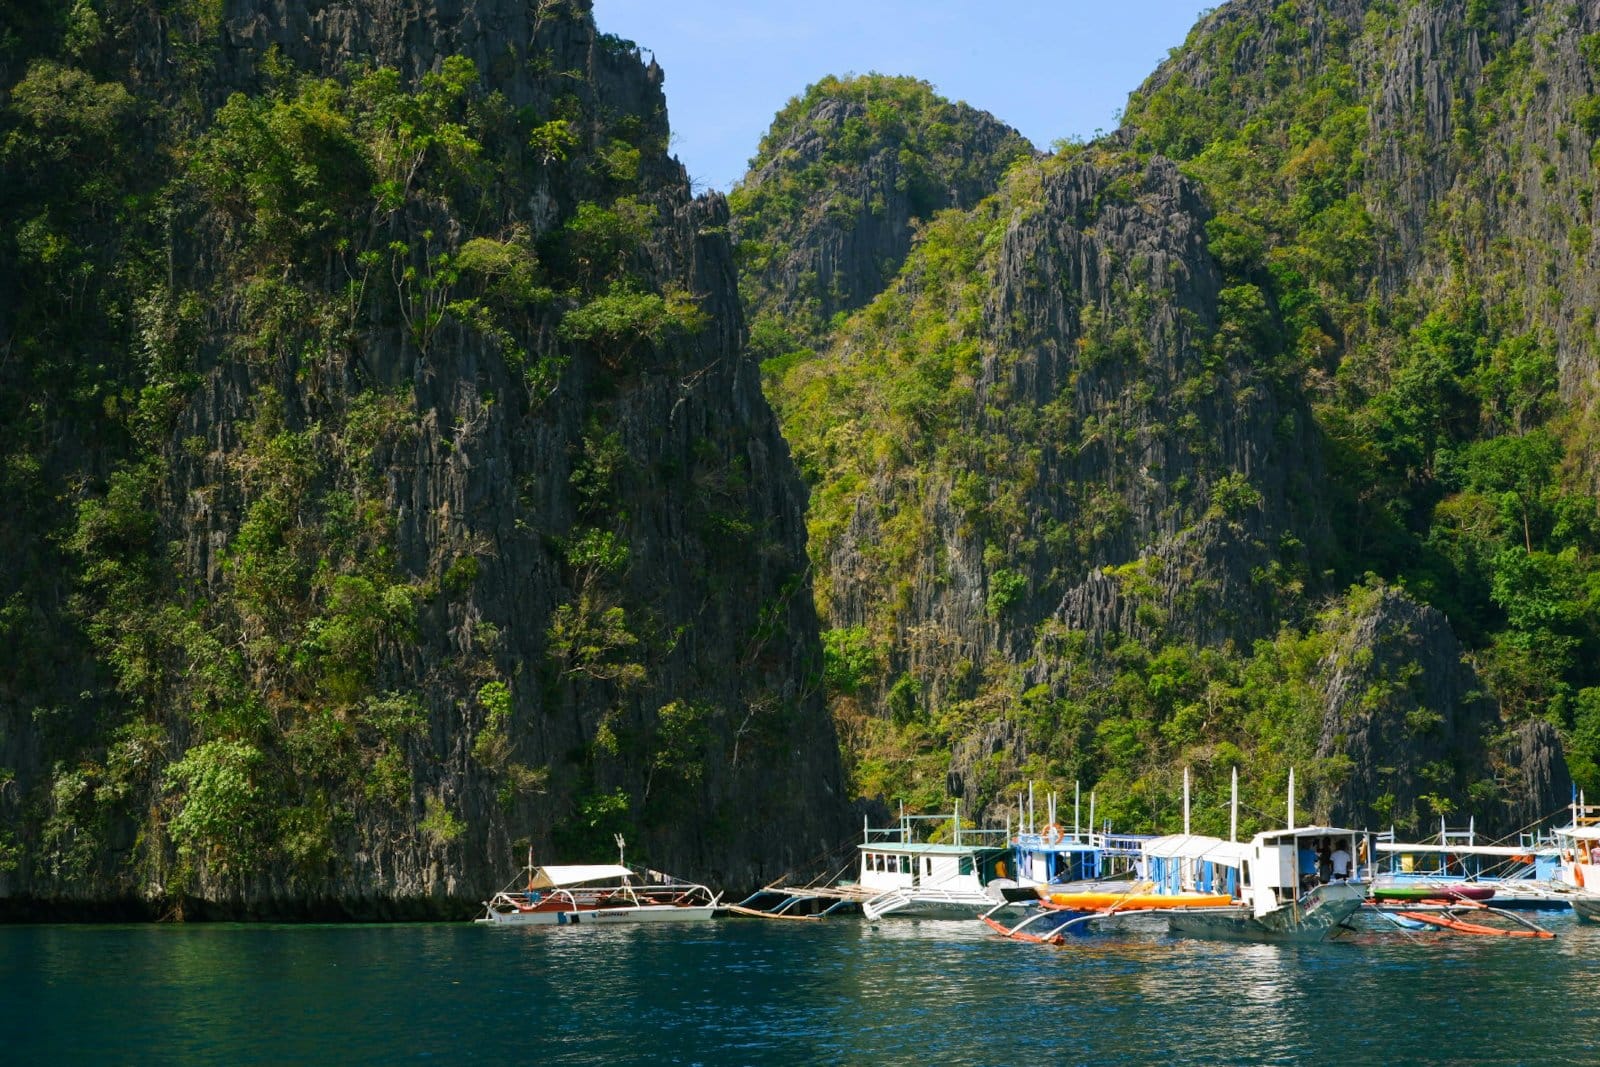 <p class="wp-caption-text">Image Credit: Pexels / Mark Chinlee</p>  <p><span>Palawan, often referred to as the last frontier of the Philippines, is an archipelagic province characterized by its exceptional natural beauty. This island paradise boasts pristine white-sand beaches, crystal-clear waters, and a rich marine ecosystem, making it a haven for snorkelers and divers alike. The UNESCO World Heritage-listed Puerto Princesa Subterranean River National Park is one of its most famous attractions, featuring a spectacular limestone karst landscape and an underground river. Palawan’s biodiversity is not only limited to its marine life but also extends to its terrestrial habitats, where dense jungles and mangrove forests are home to a variety of wildlife. The island’s commitment to eco-tourism and conservation is evident in its well-preserved natural attractions and sustainable tourism practices. Palawan’s cultural heritage, reflected in its indigenous communities and historical sites, adds another layer of richness to the visitor experience.</span></p> <p><b>Insider’s Tip:</b><span> For those seeking a more secluded experience, the islands of Coron and El Nido offer stunning landscapes and world-class diving spots that are less frequented by tourists. These locations provide an intimate encounter with nature’s splendor.</span></p> <p><b>When to Travel:</b><span> October to May during the dry season for optimal beach weather.</span></p> <p><b>How to Get There:</b><span> Fly to Puerto Princesa International Airport (PPS) or directly to El Nido if heading to the northern parts.</span></p>